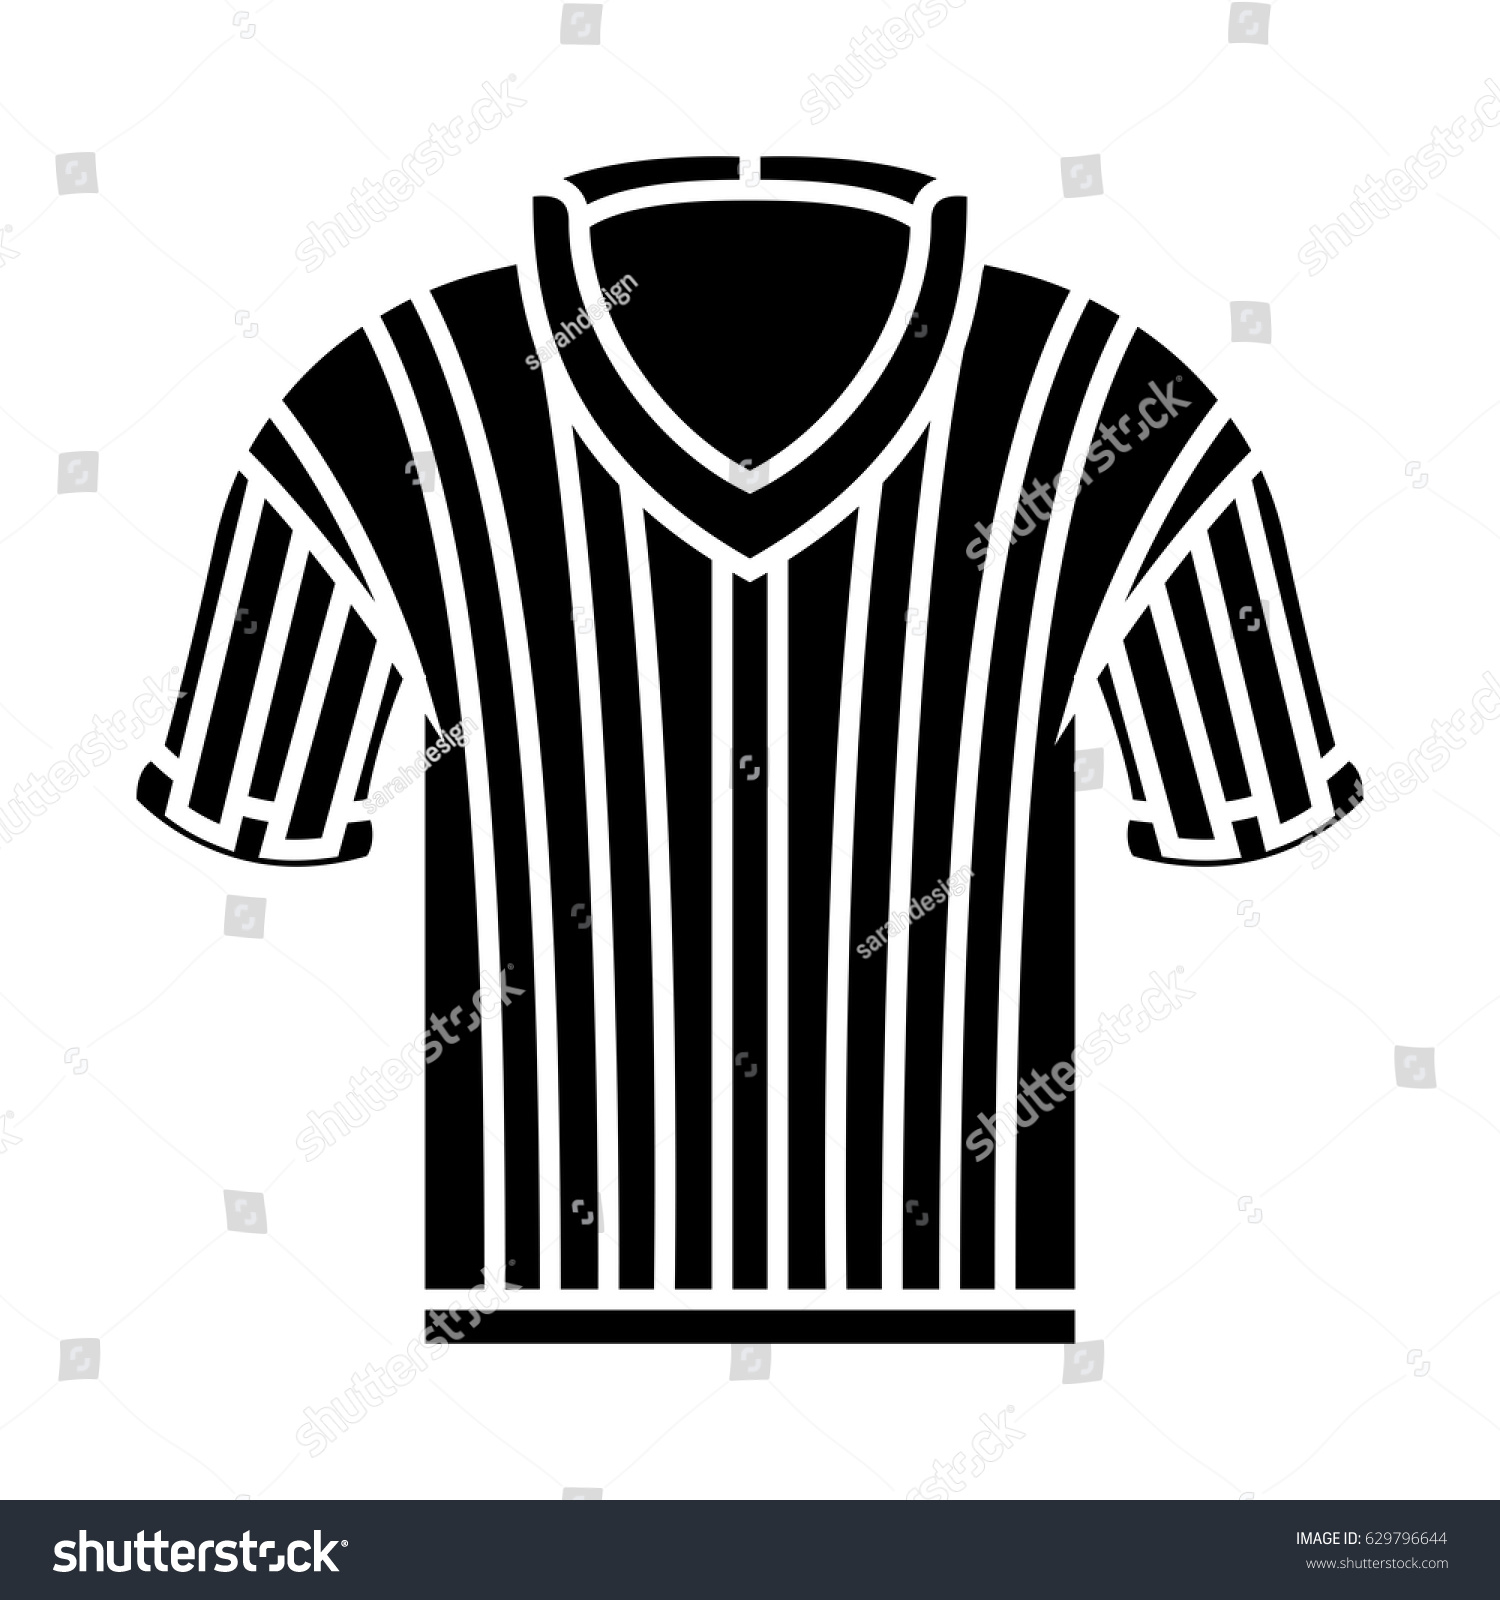 81 Referee icon images at Vectorified.com